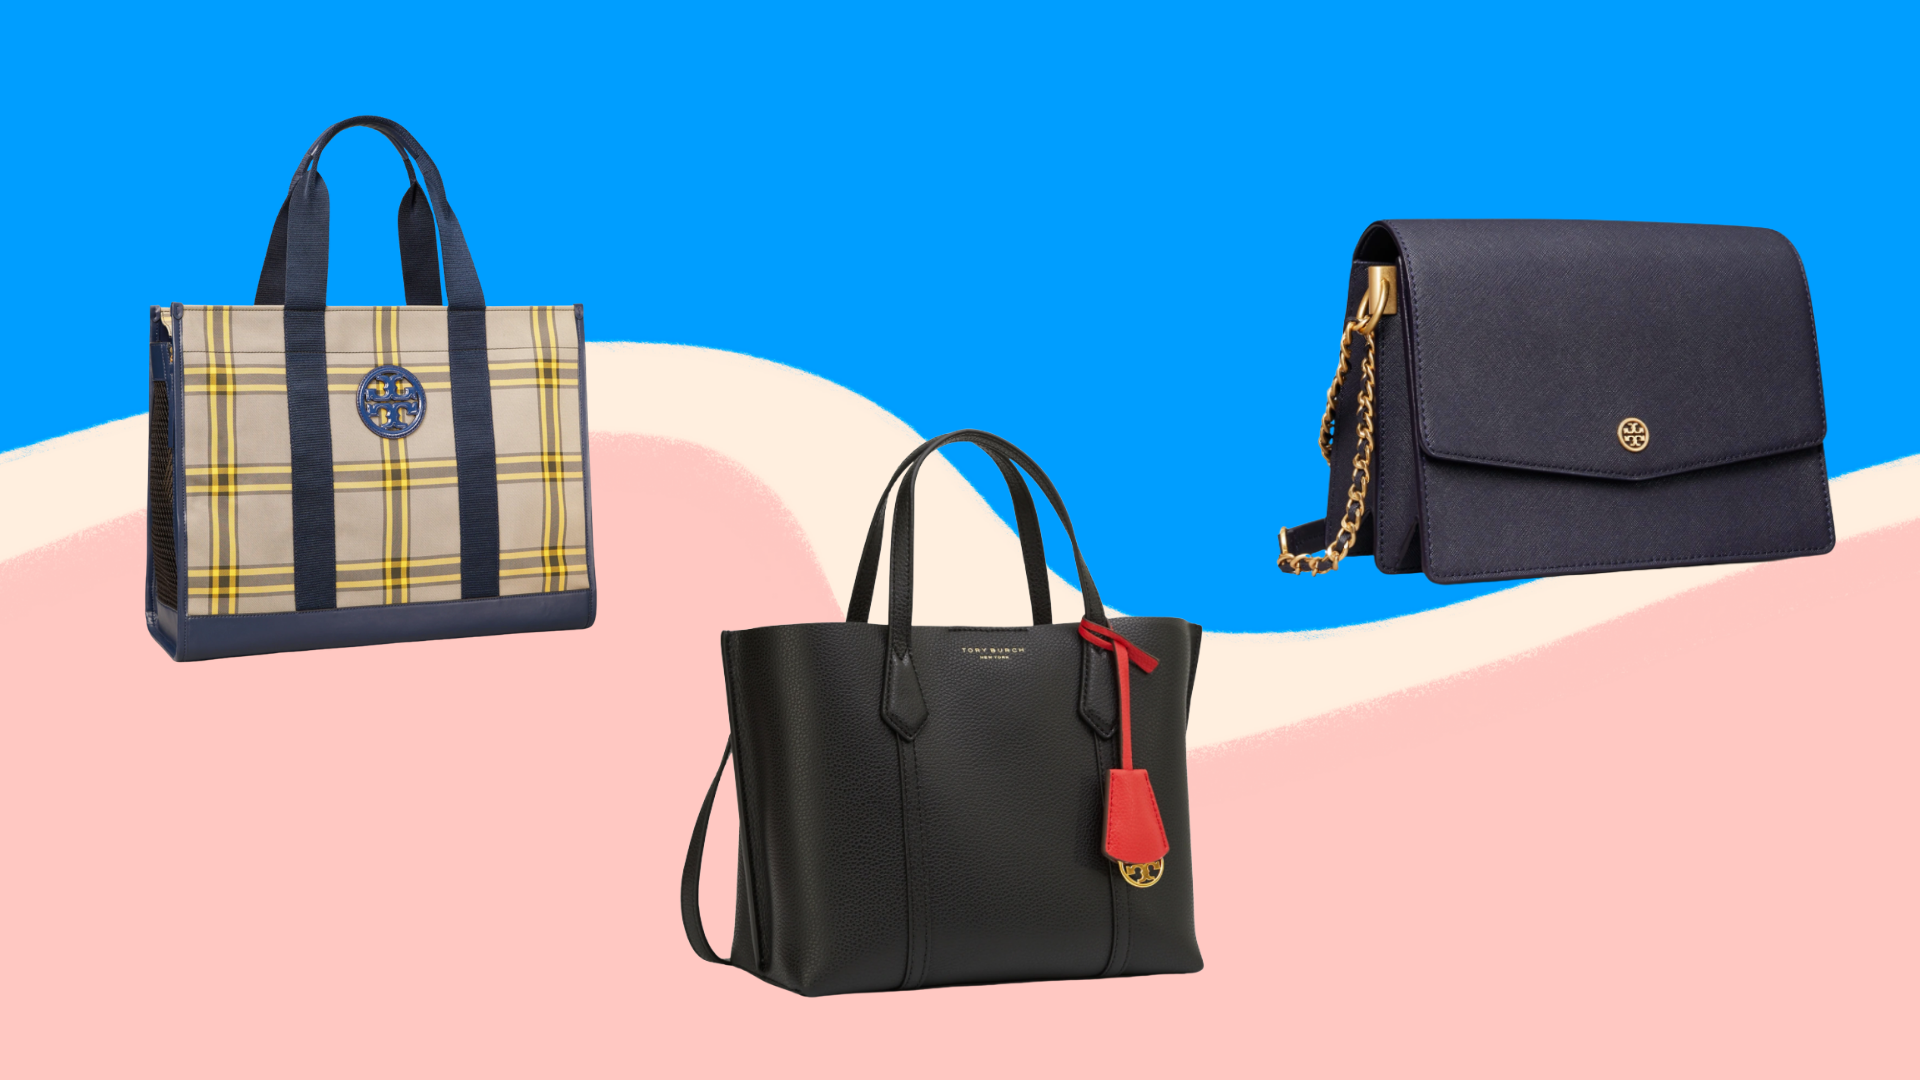 Tory Burch private sale: Shop the best deals during the semi-annual event